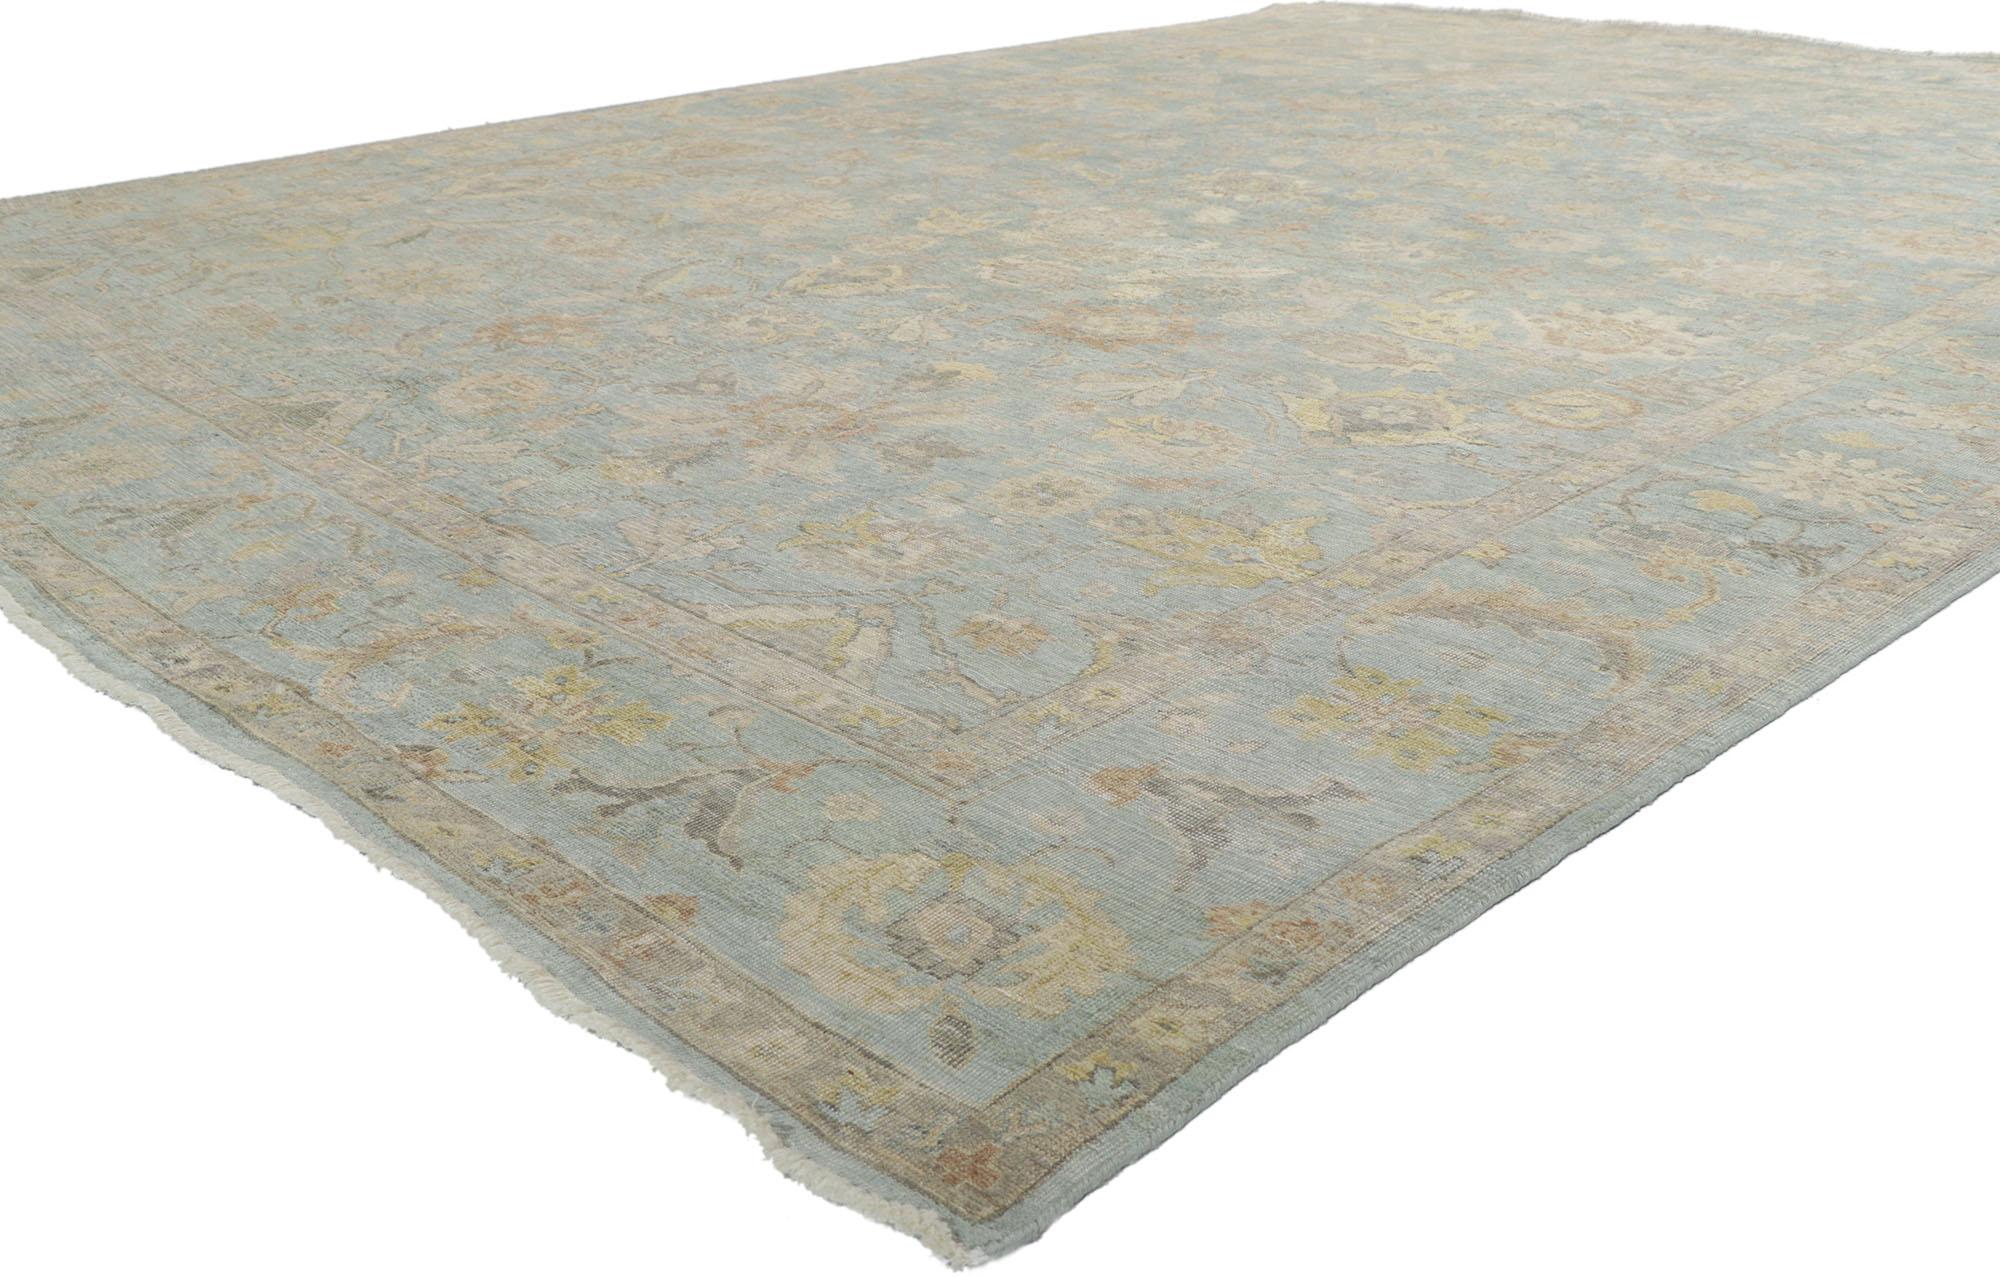 30707 Light Blue Modern Oushak Rug, 08'10 x 11'11. Indian Oushak rugs are a captivating fusion of traditional Turkish Oushak designs and the skilled craftsmanship of Indian artisans. Inspired by the renowned Oushak carpets from Turkey, these rugs